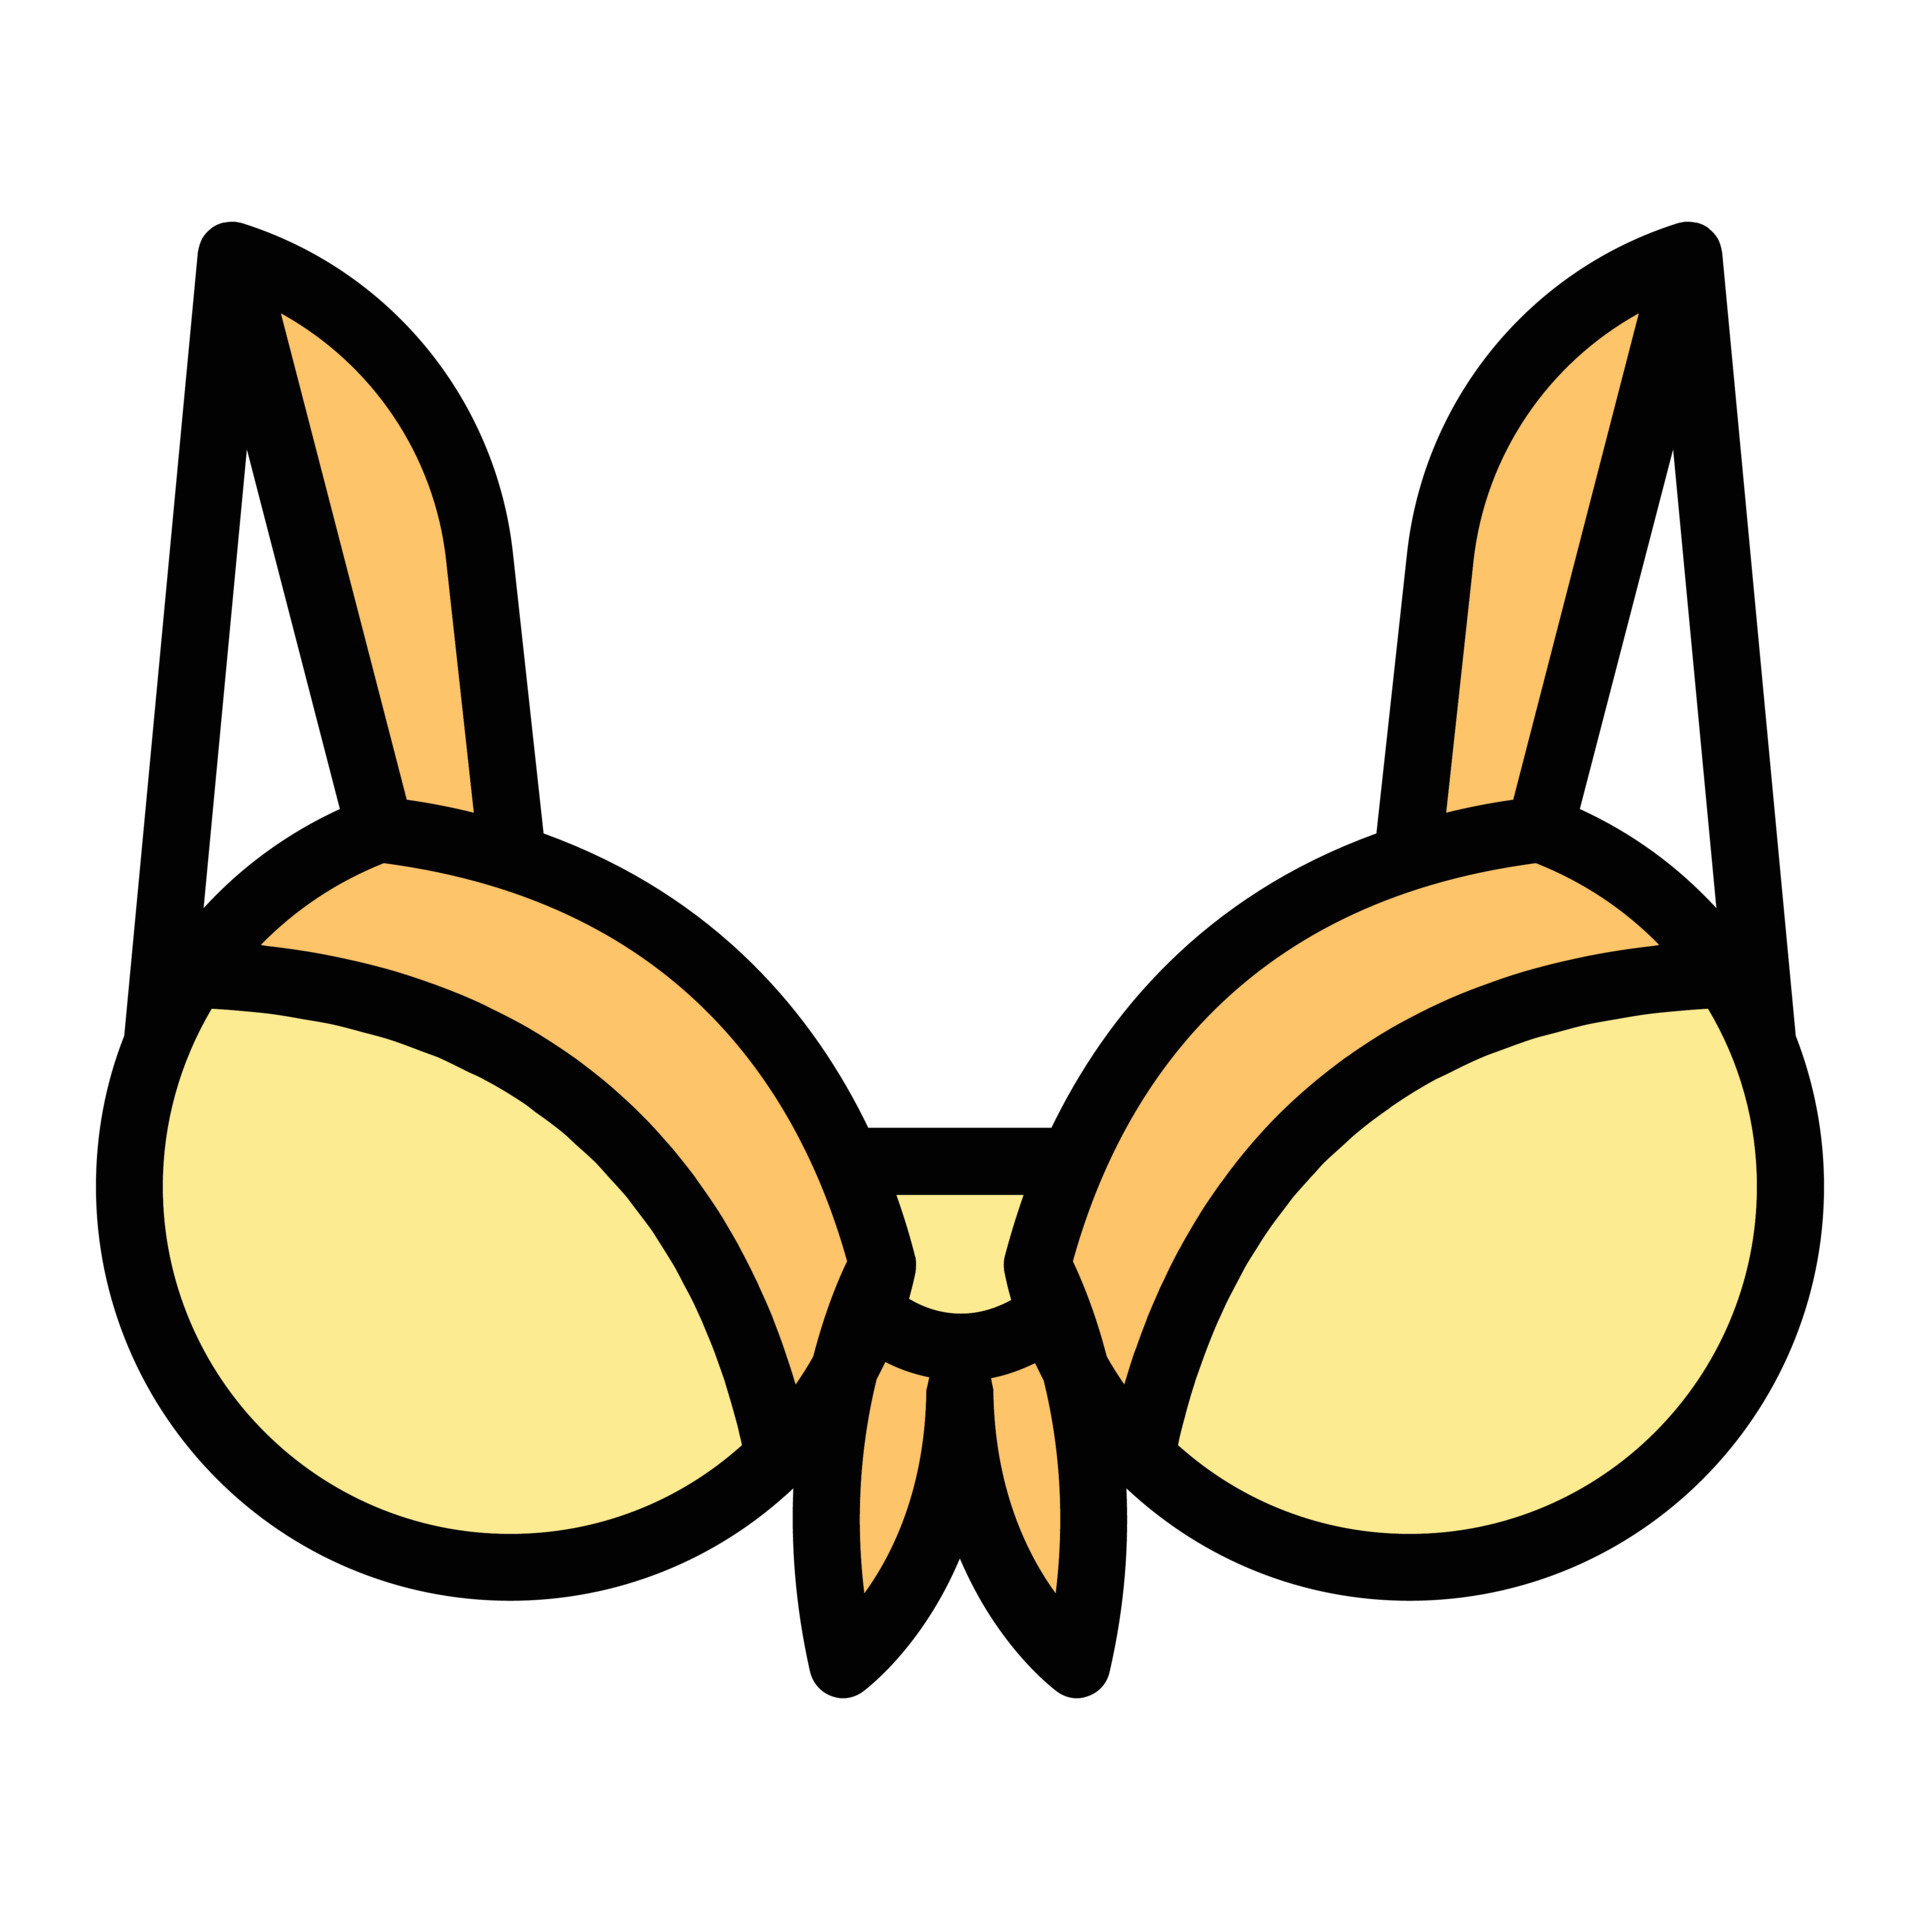 Padded Bra Icon Outline Illustration Padded Stock Vector (Royalty Free)  581724733